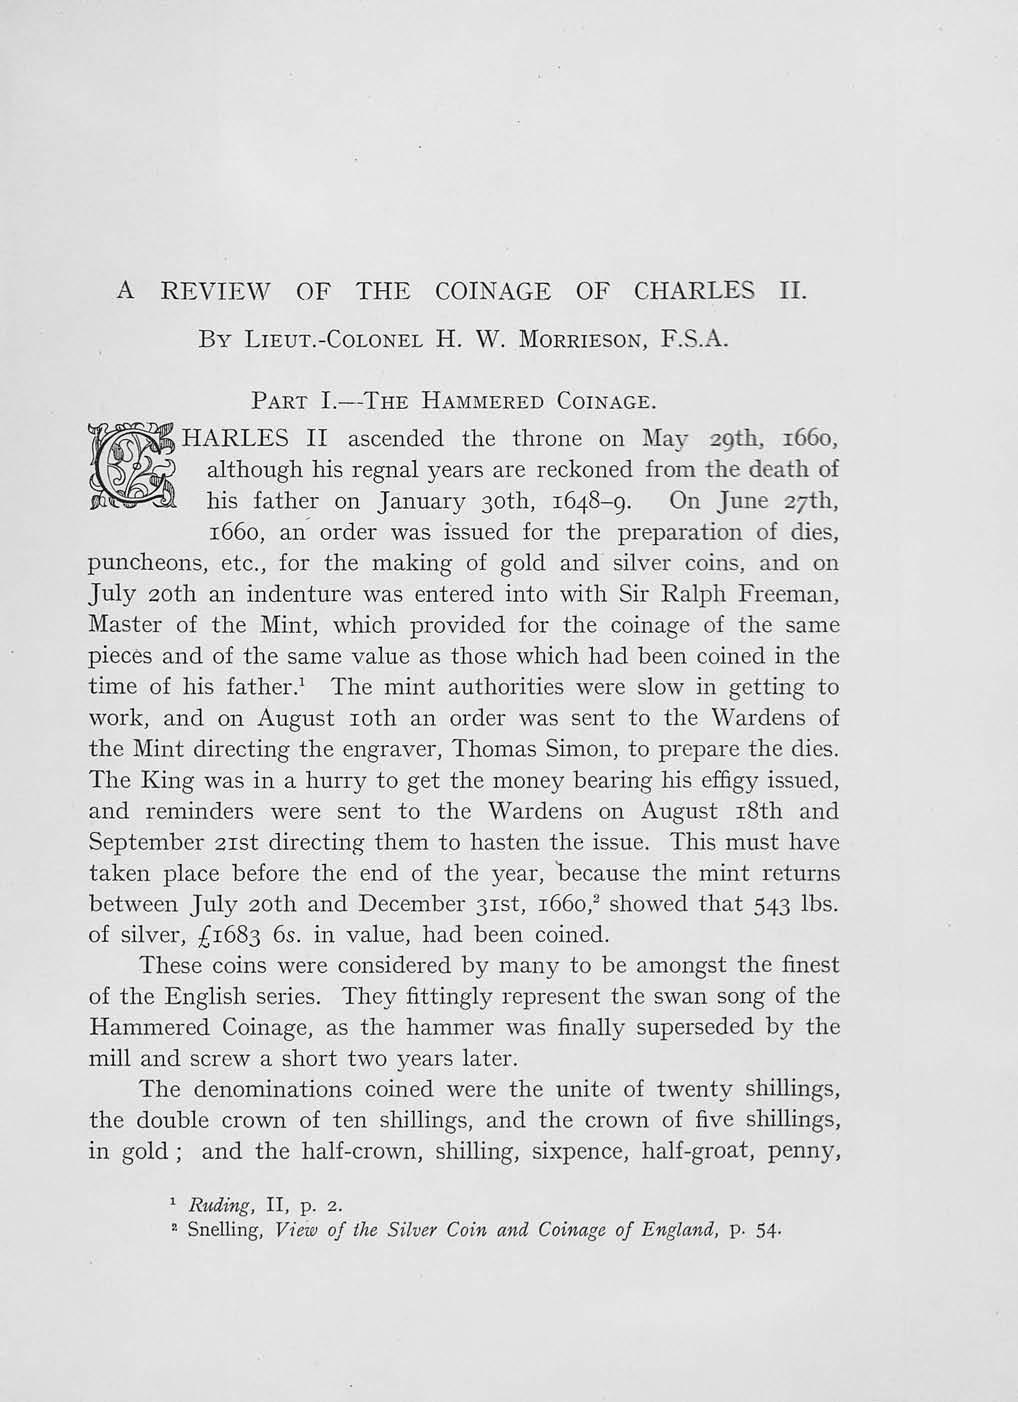 A REVIE\i\T OF THE COINAGE OF CHARLE II. By LIEUT.-COLONEL H. W. MORRIESON, F.s.A. PART I.--THE HAMMERED COINAGE.